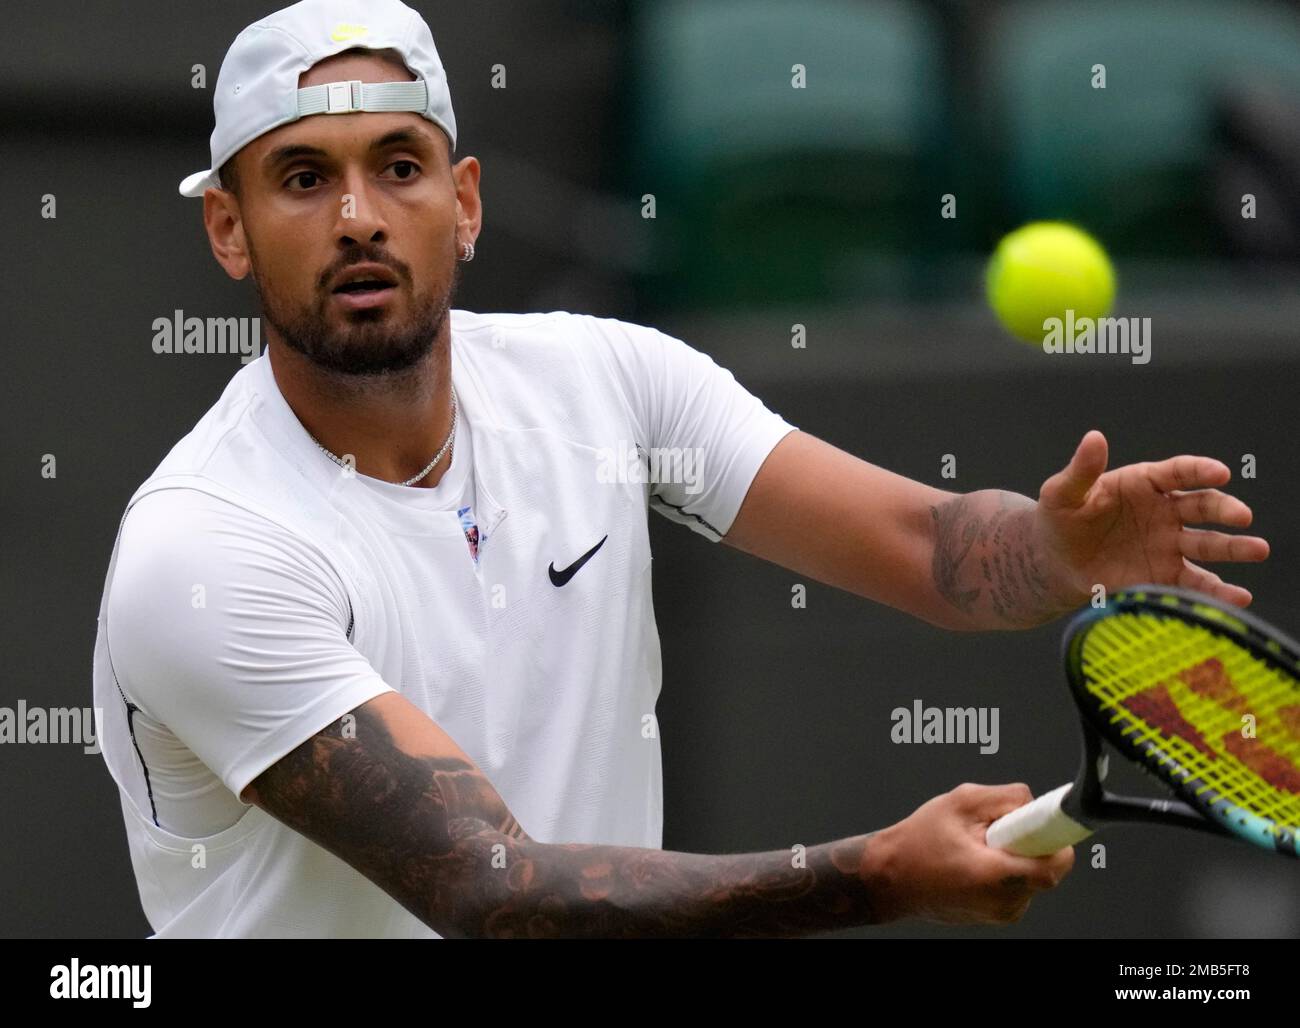 Australias Nick Kyrgios returns to Greeces Stefanos Tsitsipas during their third round mens singles match against on day six of the Wimbledon tennis championships in London, Saturday, July 2, 2022